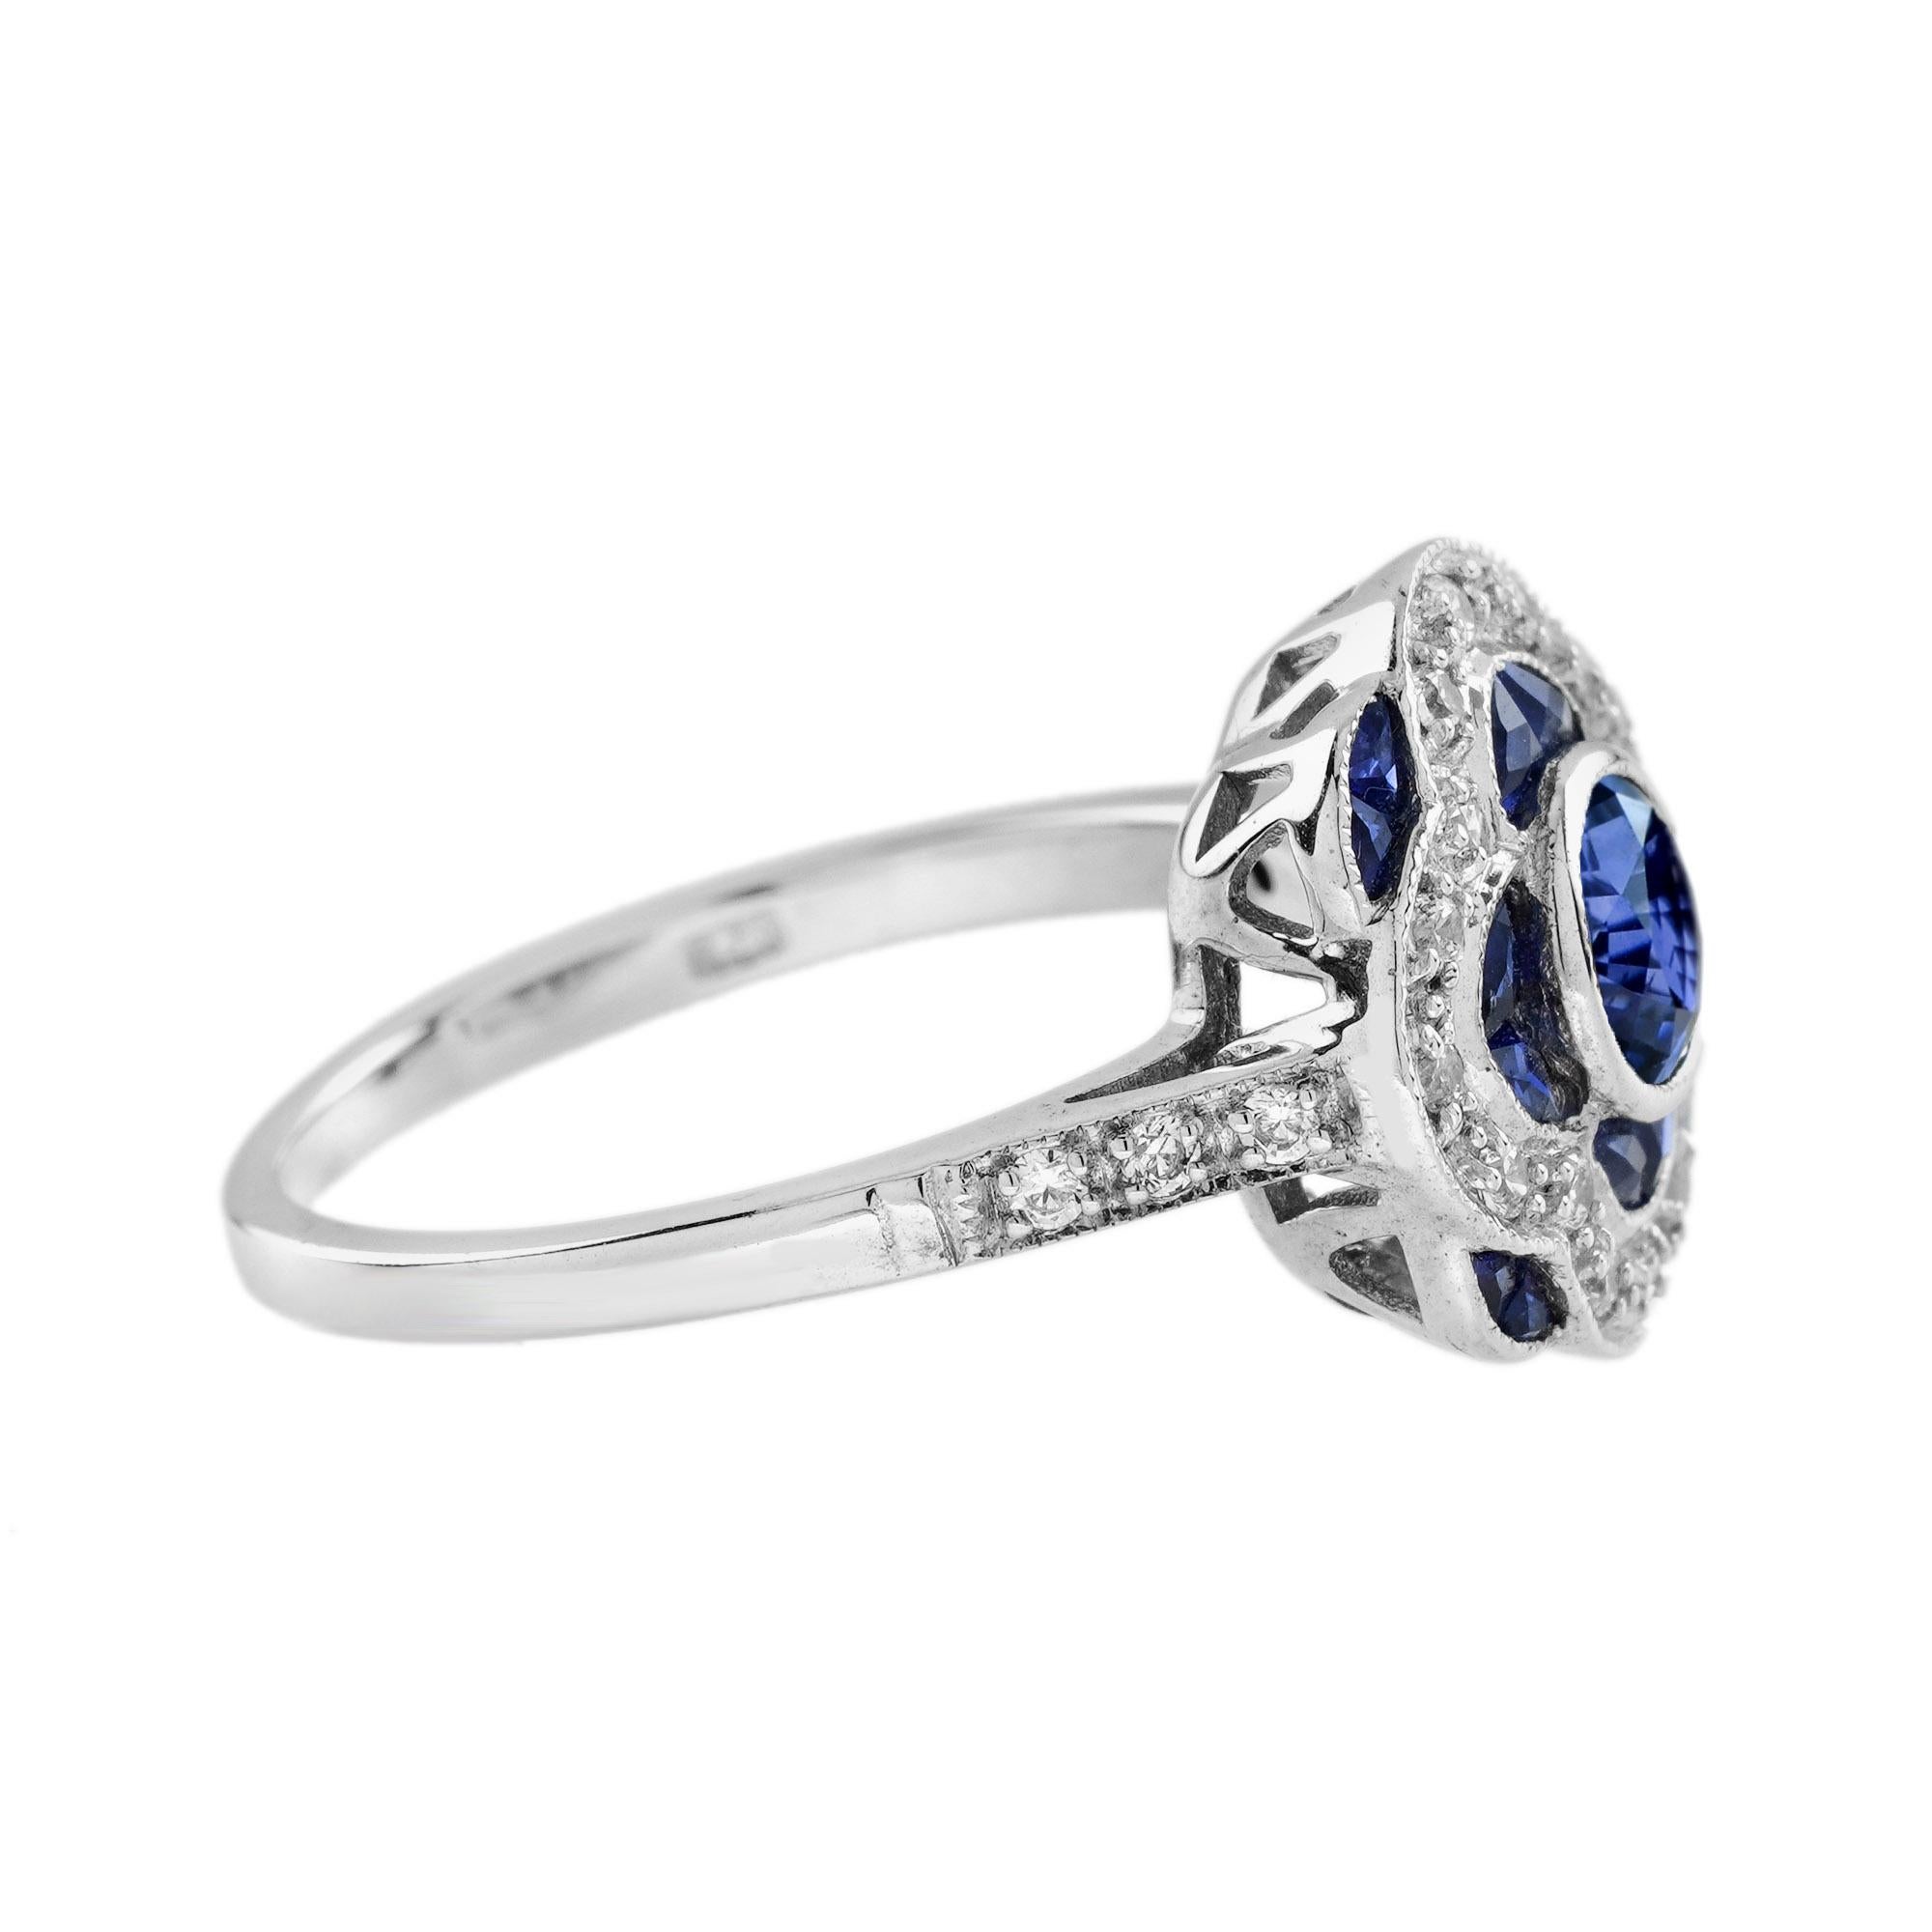 For Sale:  Ceylon Sapphire and Diamond Art Deco Style Floral Halo Ring in 18K White Gold 4